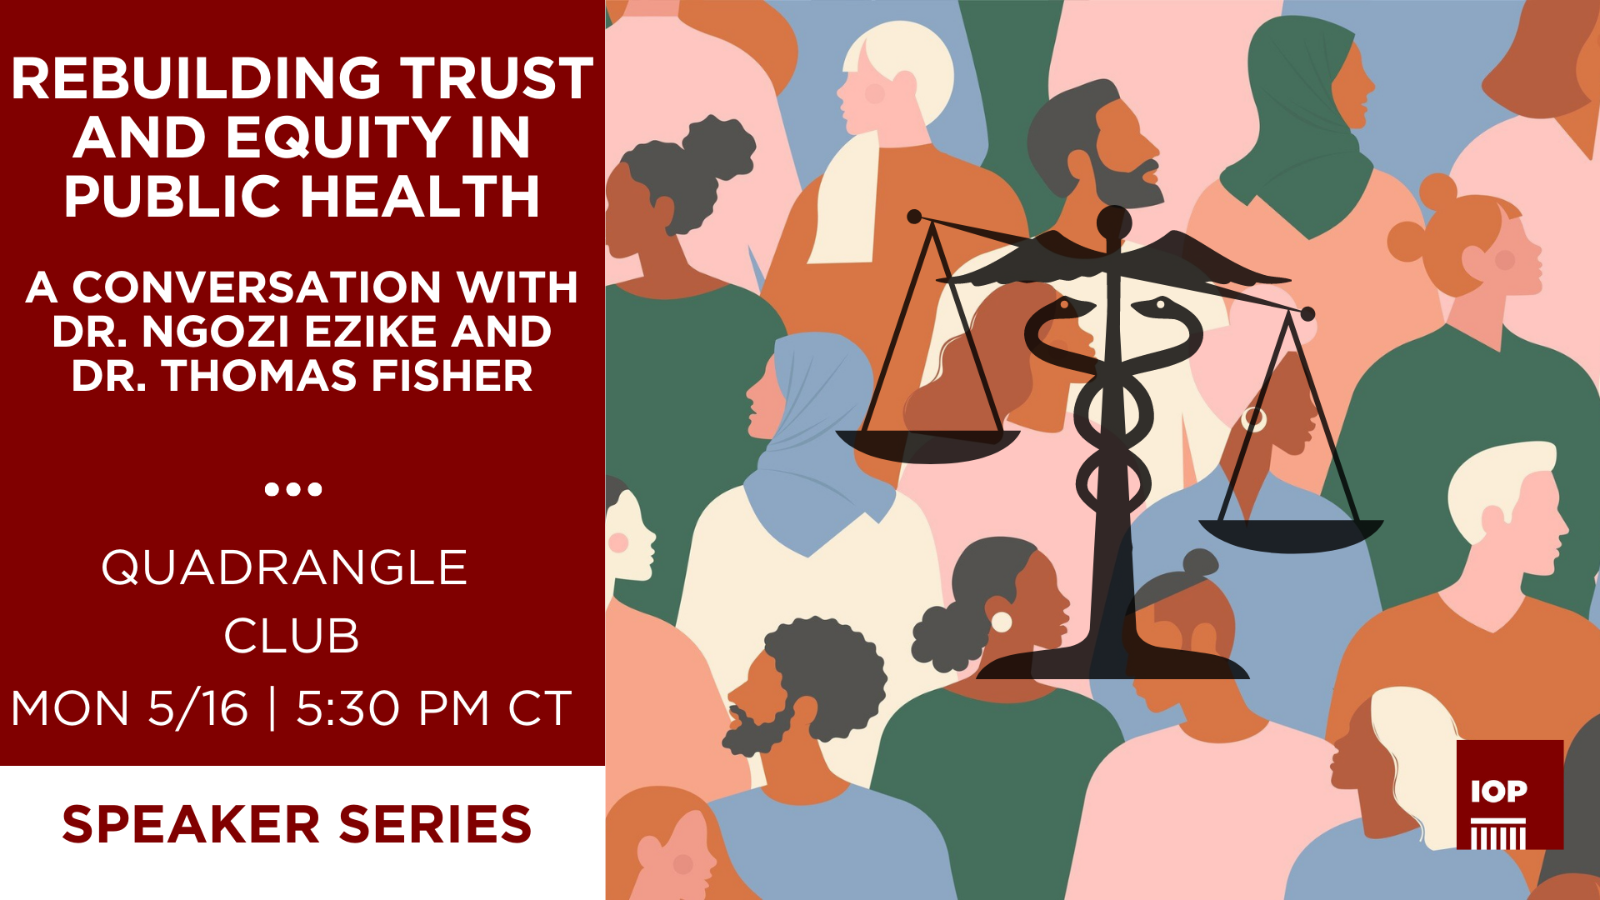 Rebuilding Trust and Equity in Public Health: A conversation with Ngozi Ezike and Thomas Fisher